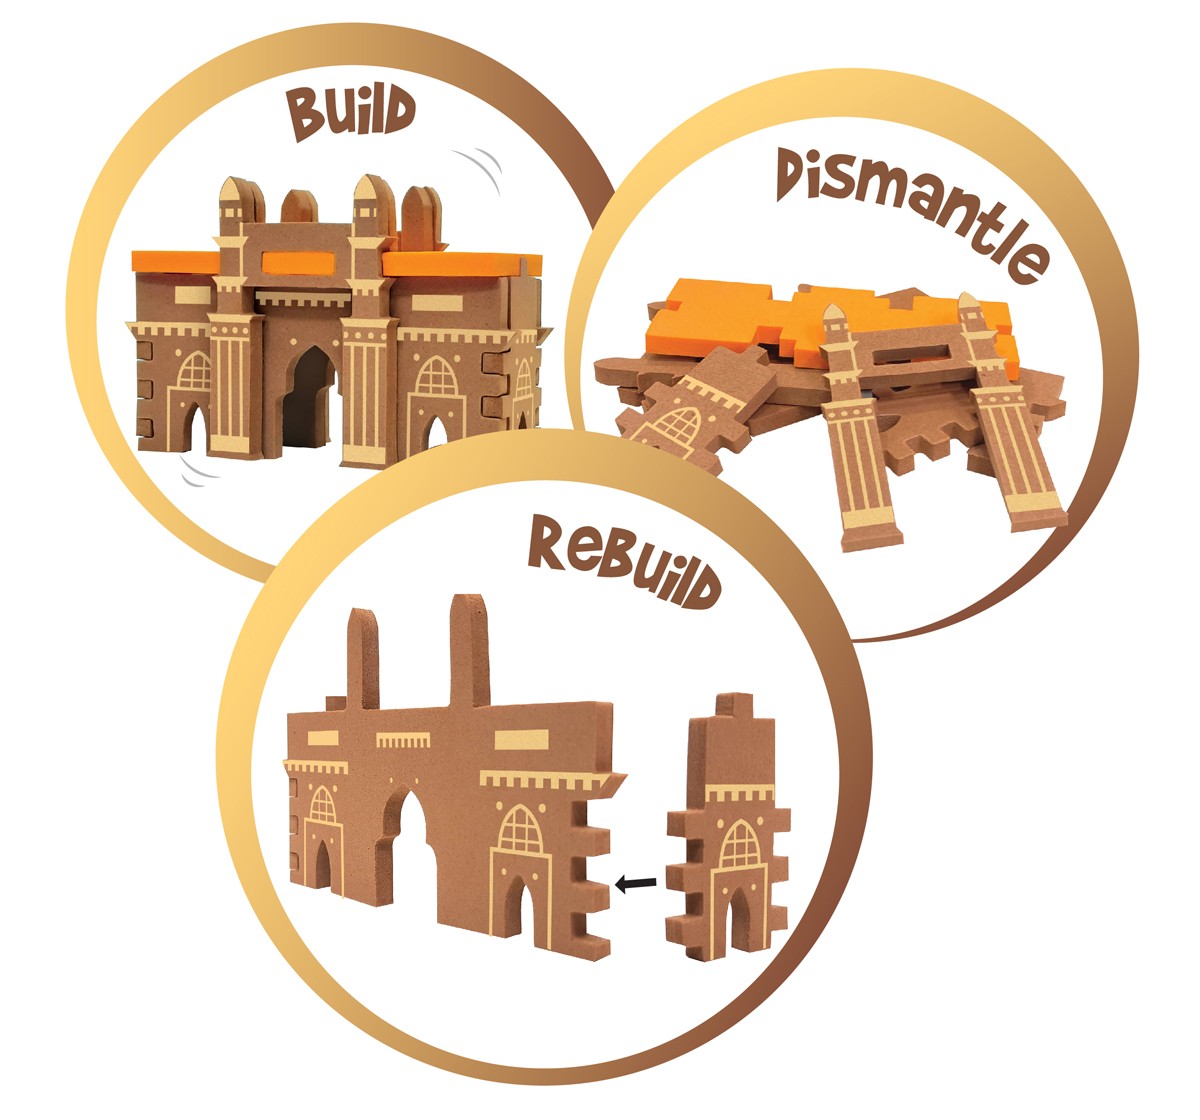 Mapology Red Fort And Hawa Mahal Puzzles For Kids Multicolour 5Y+